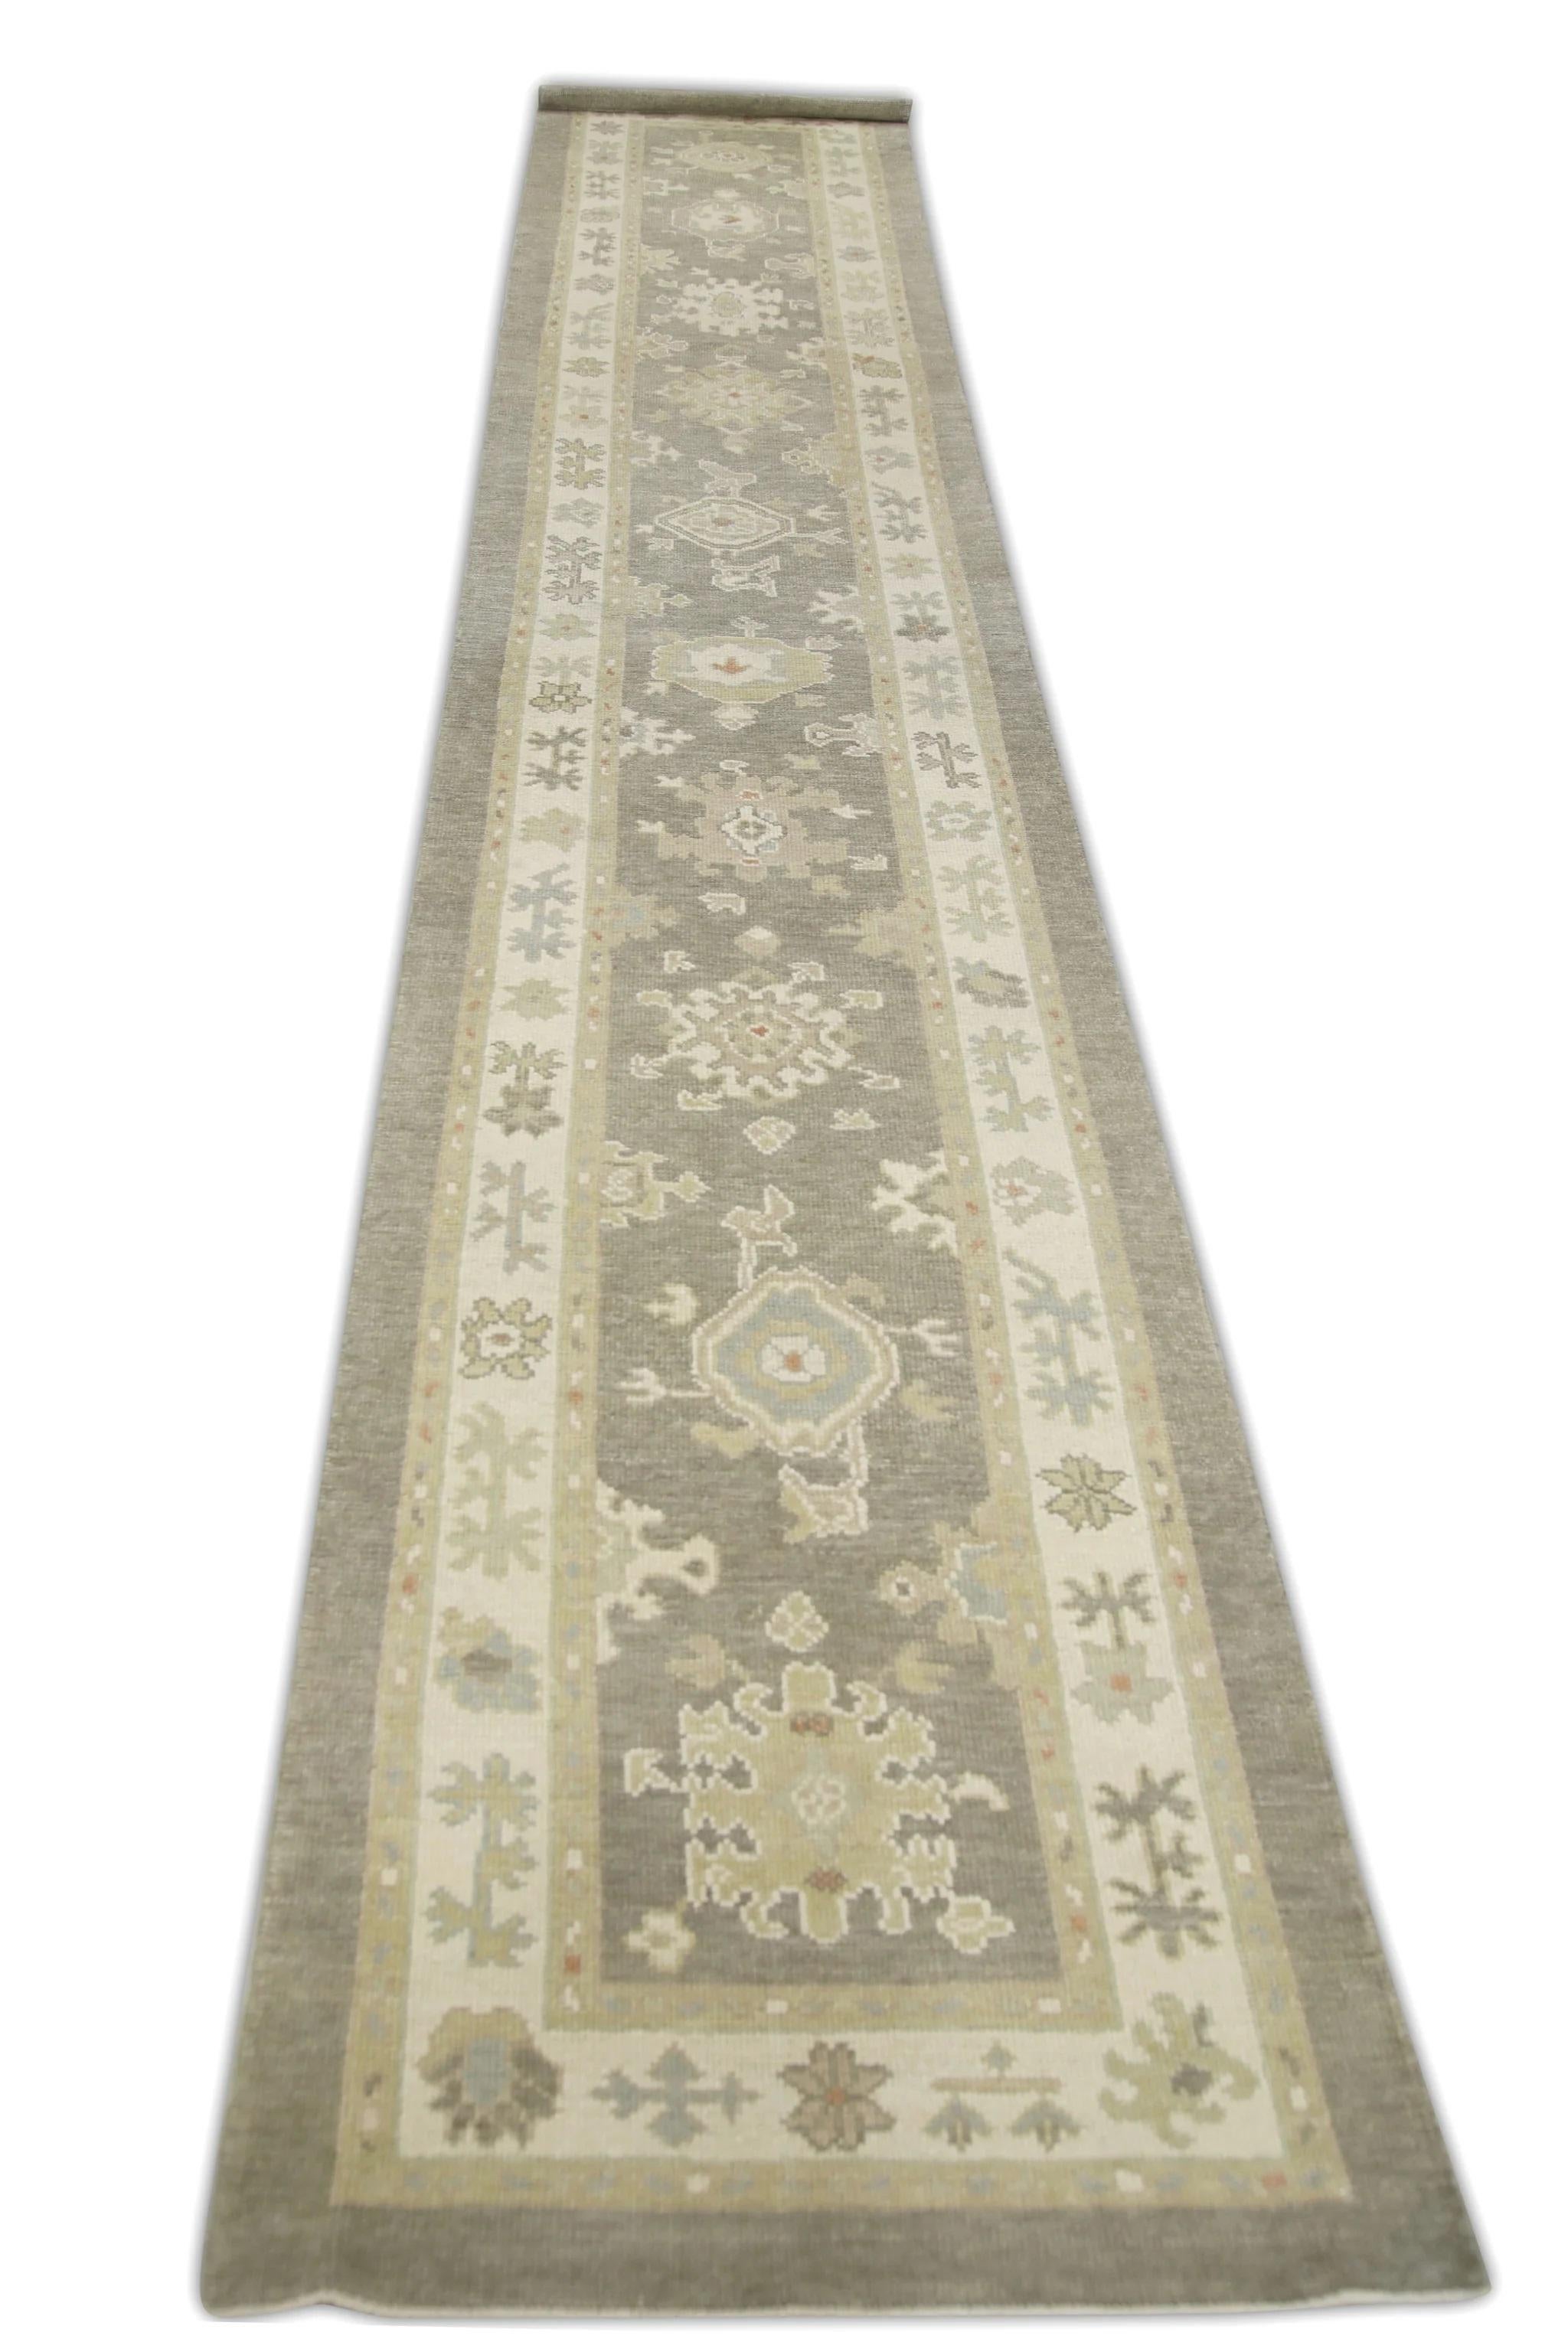 This modern Turkish oushak rug is a stunning piece of art that has been handwoven using traditional techniques by skilled artisans. The rug features intricate patterns and a soft color palette that is achieved through the use of natural vegetable